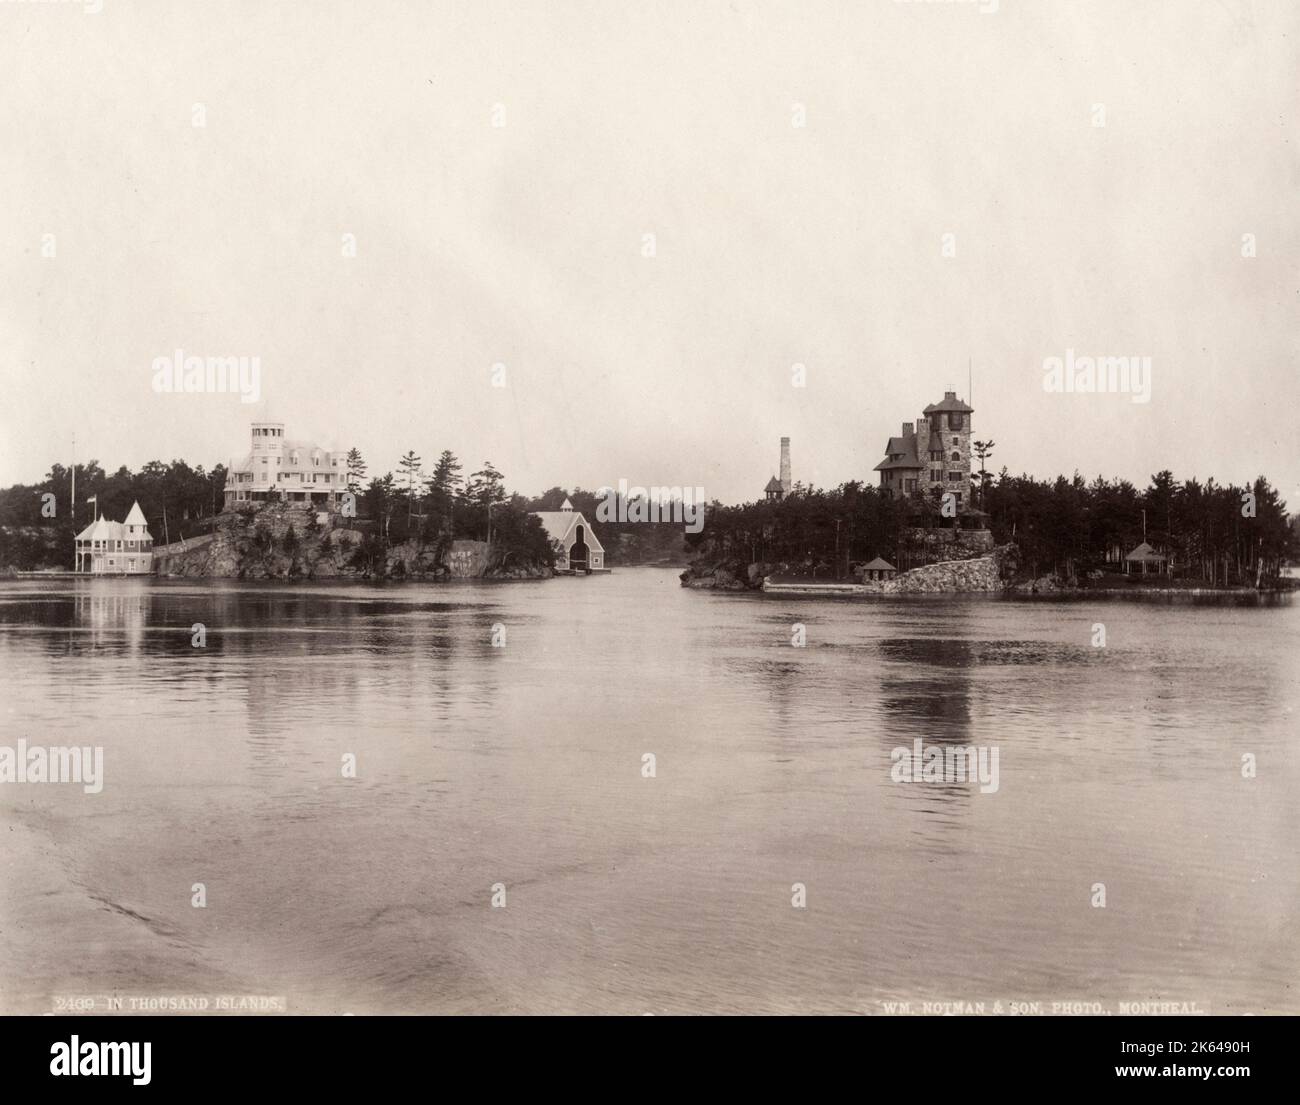 19th century vintage photograph - the Thousand Islands, St Lawrence River, Canada. The Thousand Islands are a group of more than 1,800 islands in the St. Lawrence River, straddling the border of the U.S. and Canada.  Photograph William Notman, c.1880's. Stock Photo